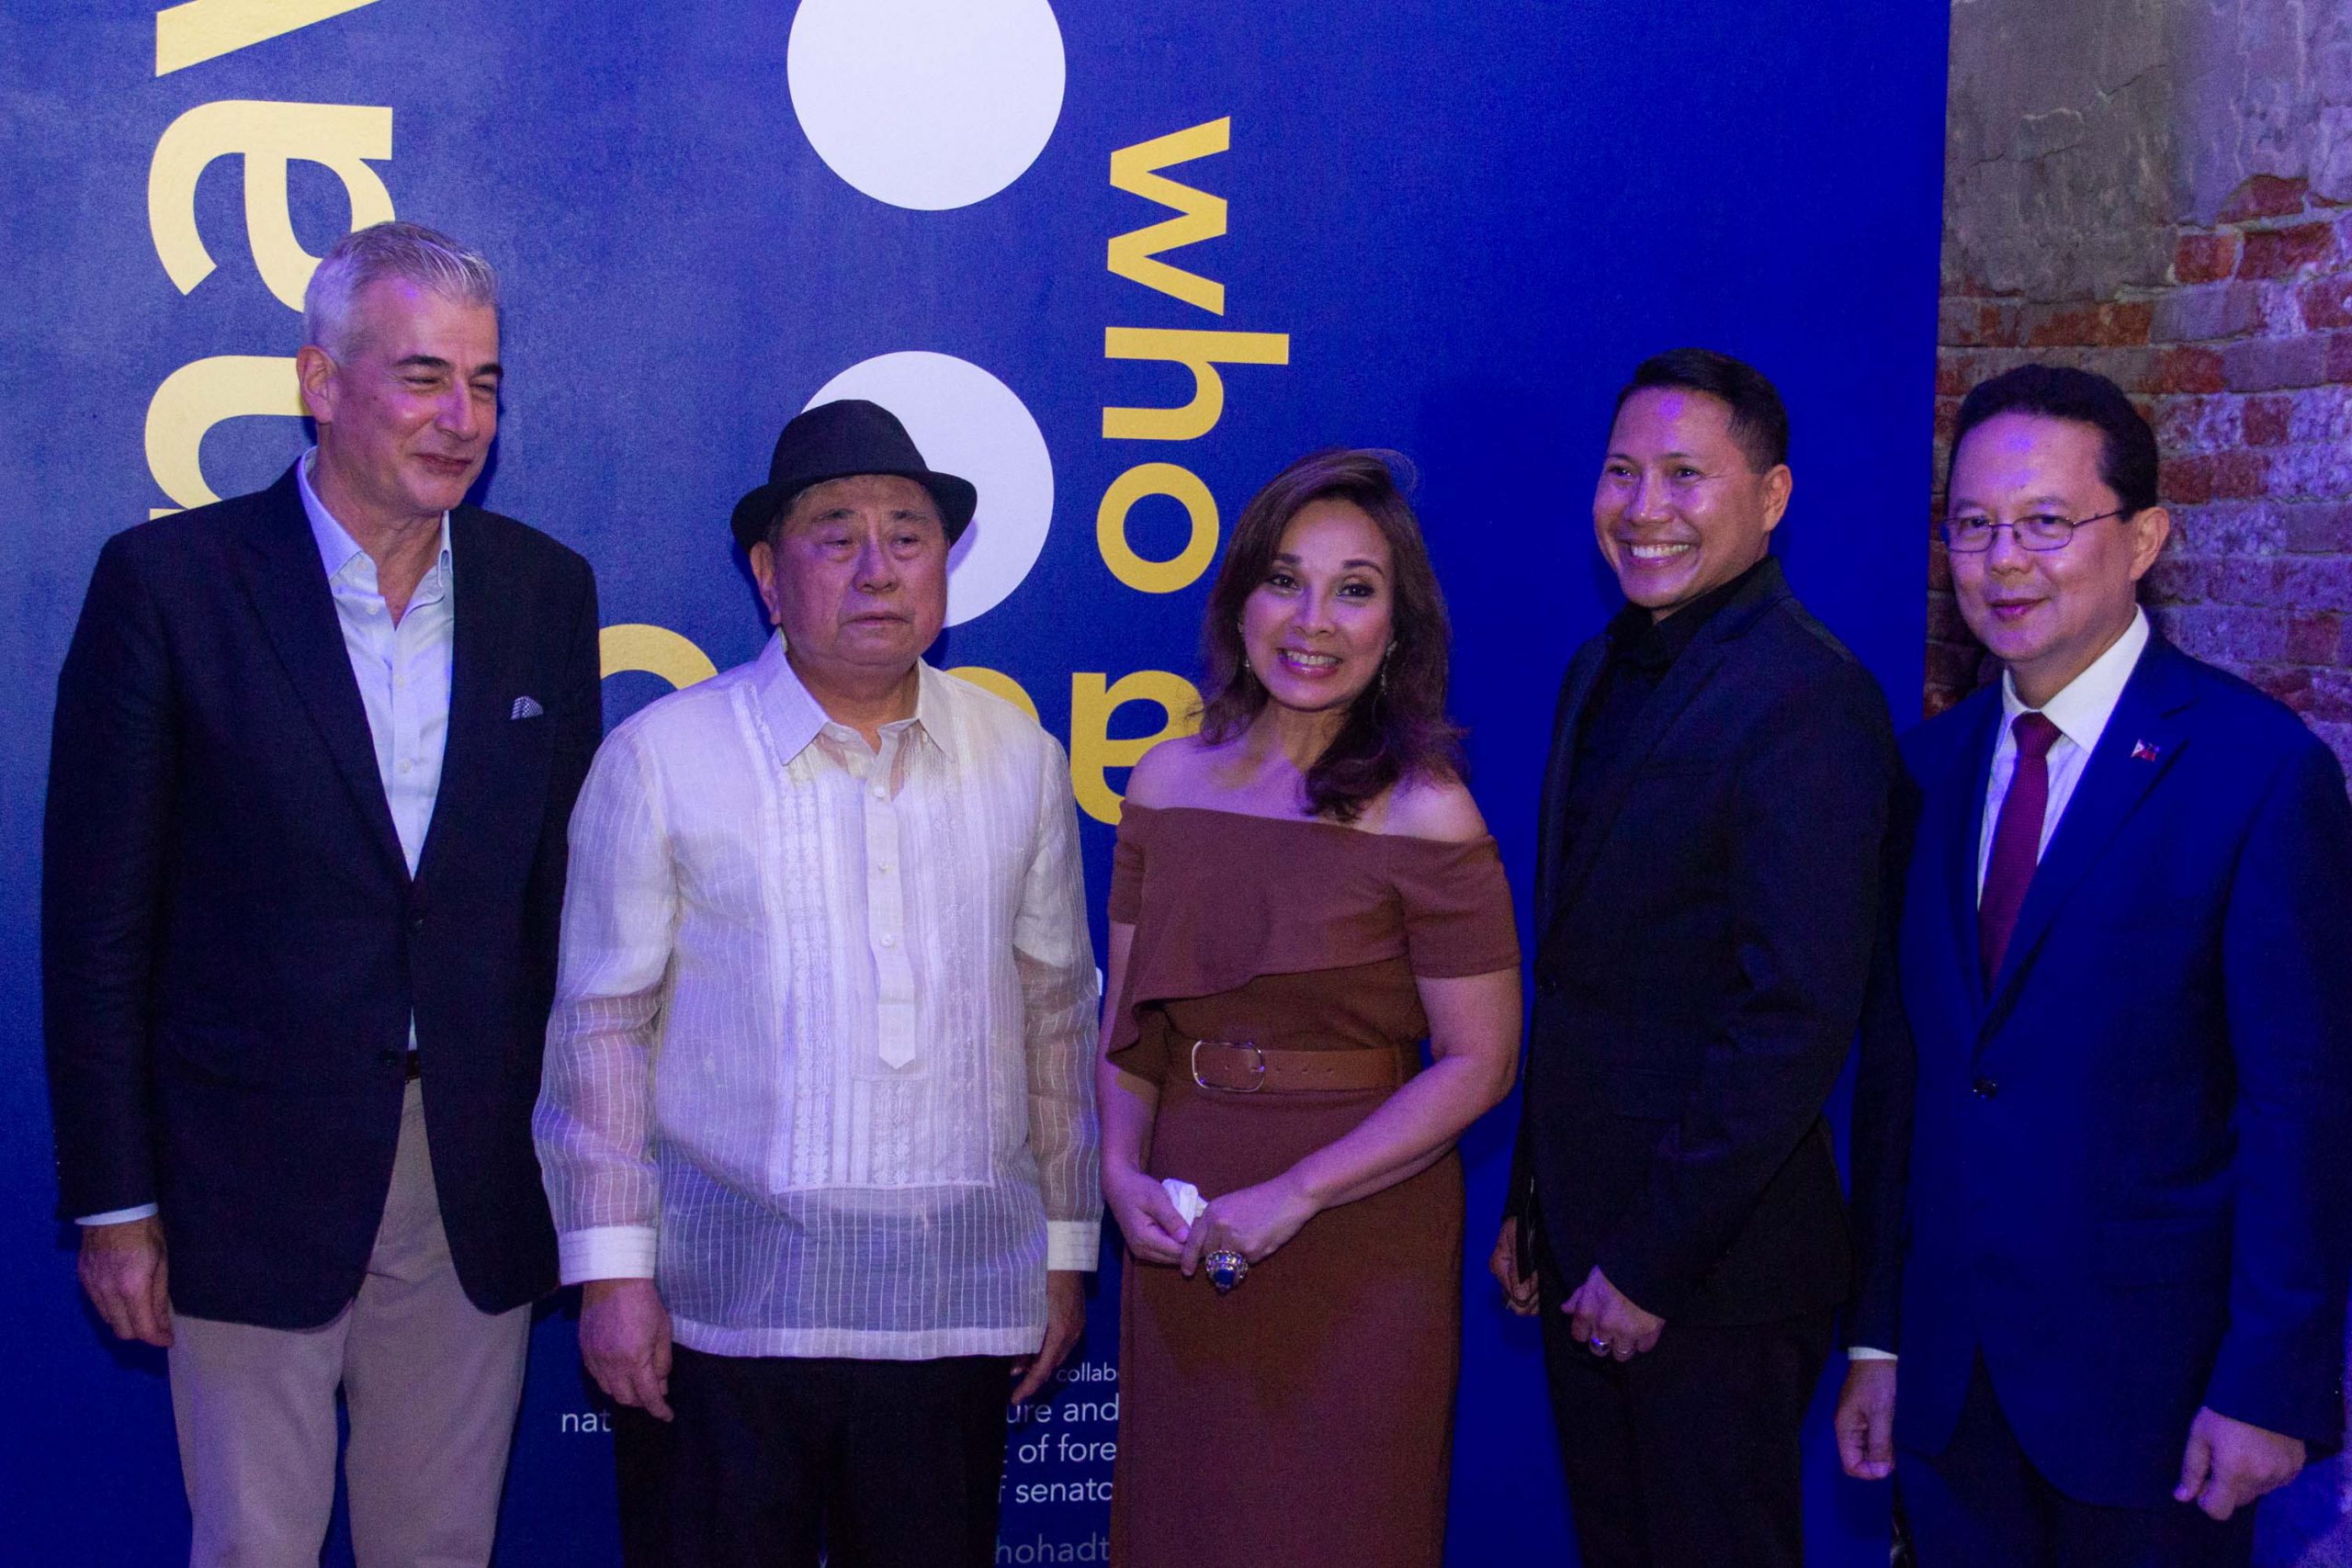 Vernissage of the Philippines’ 2nd participation in the Venice Architecture Biennale